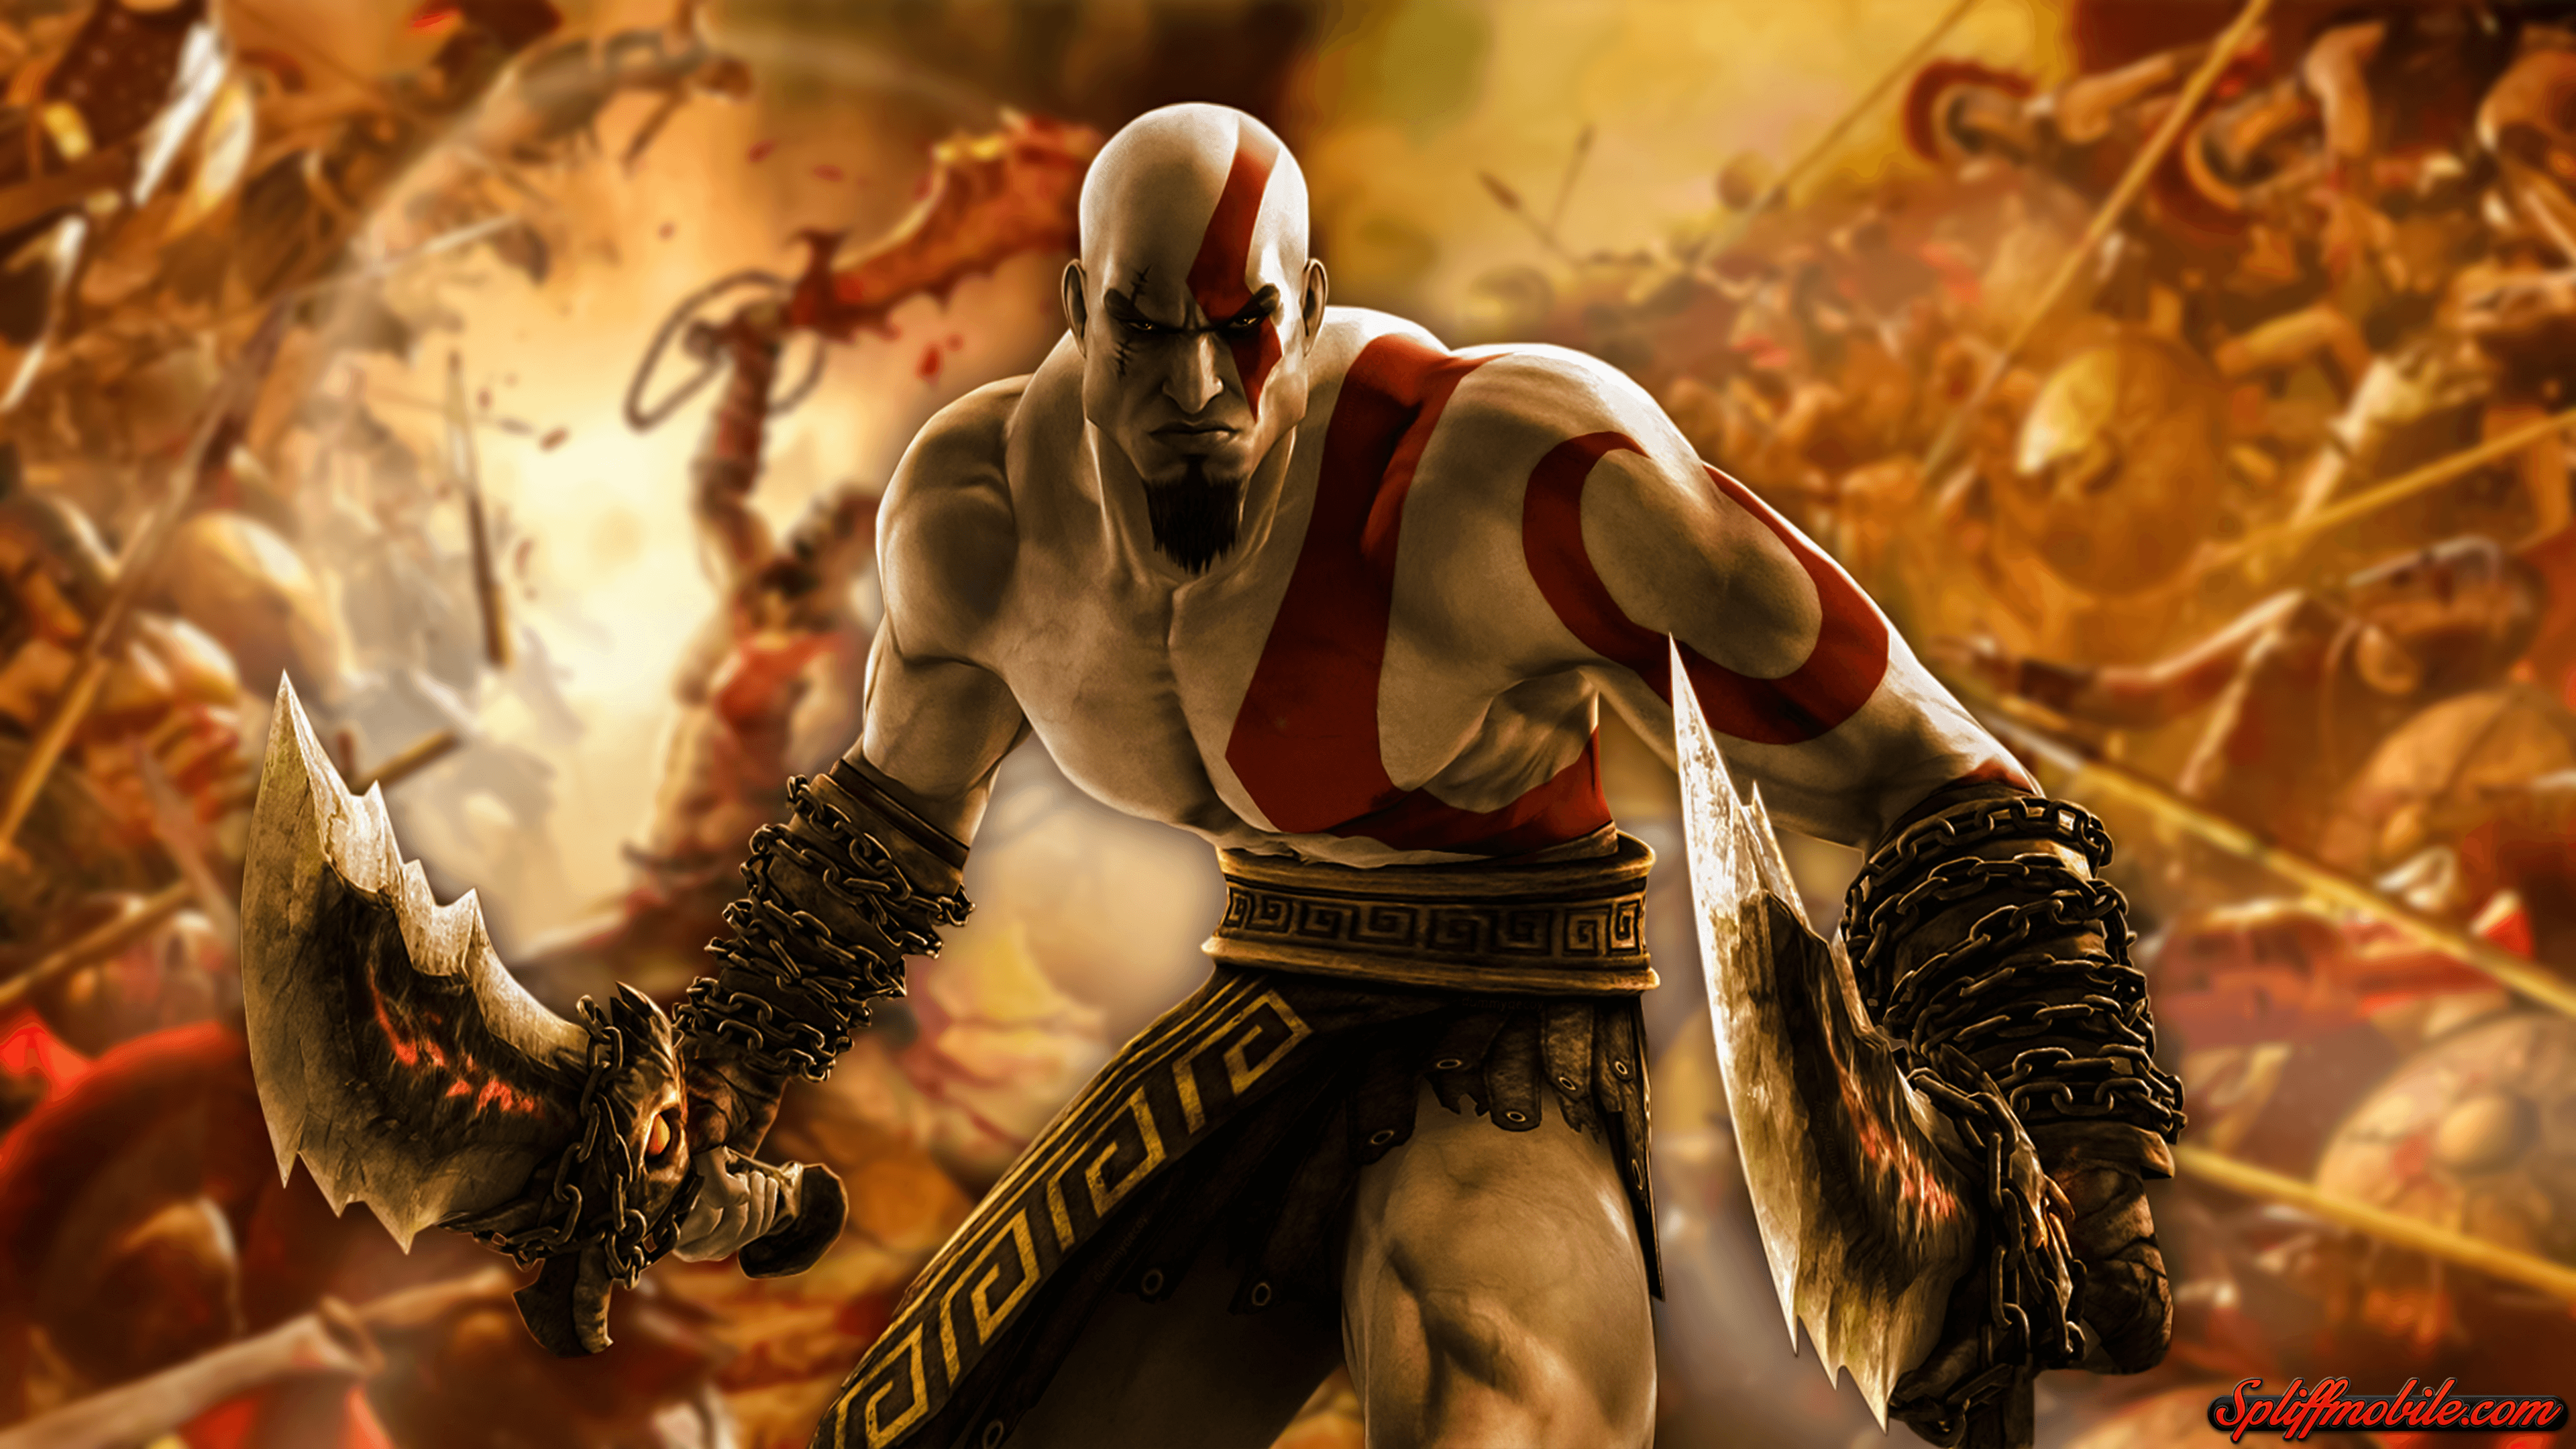 Free Wicked Cool God of War Wallpaper